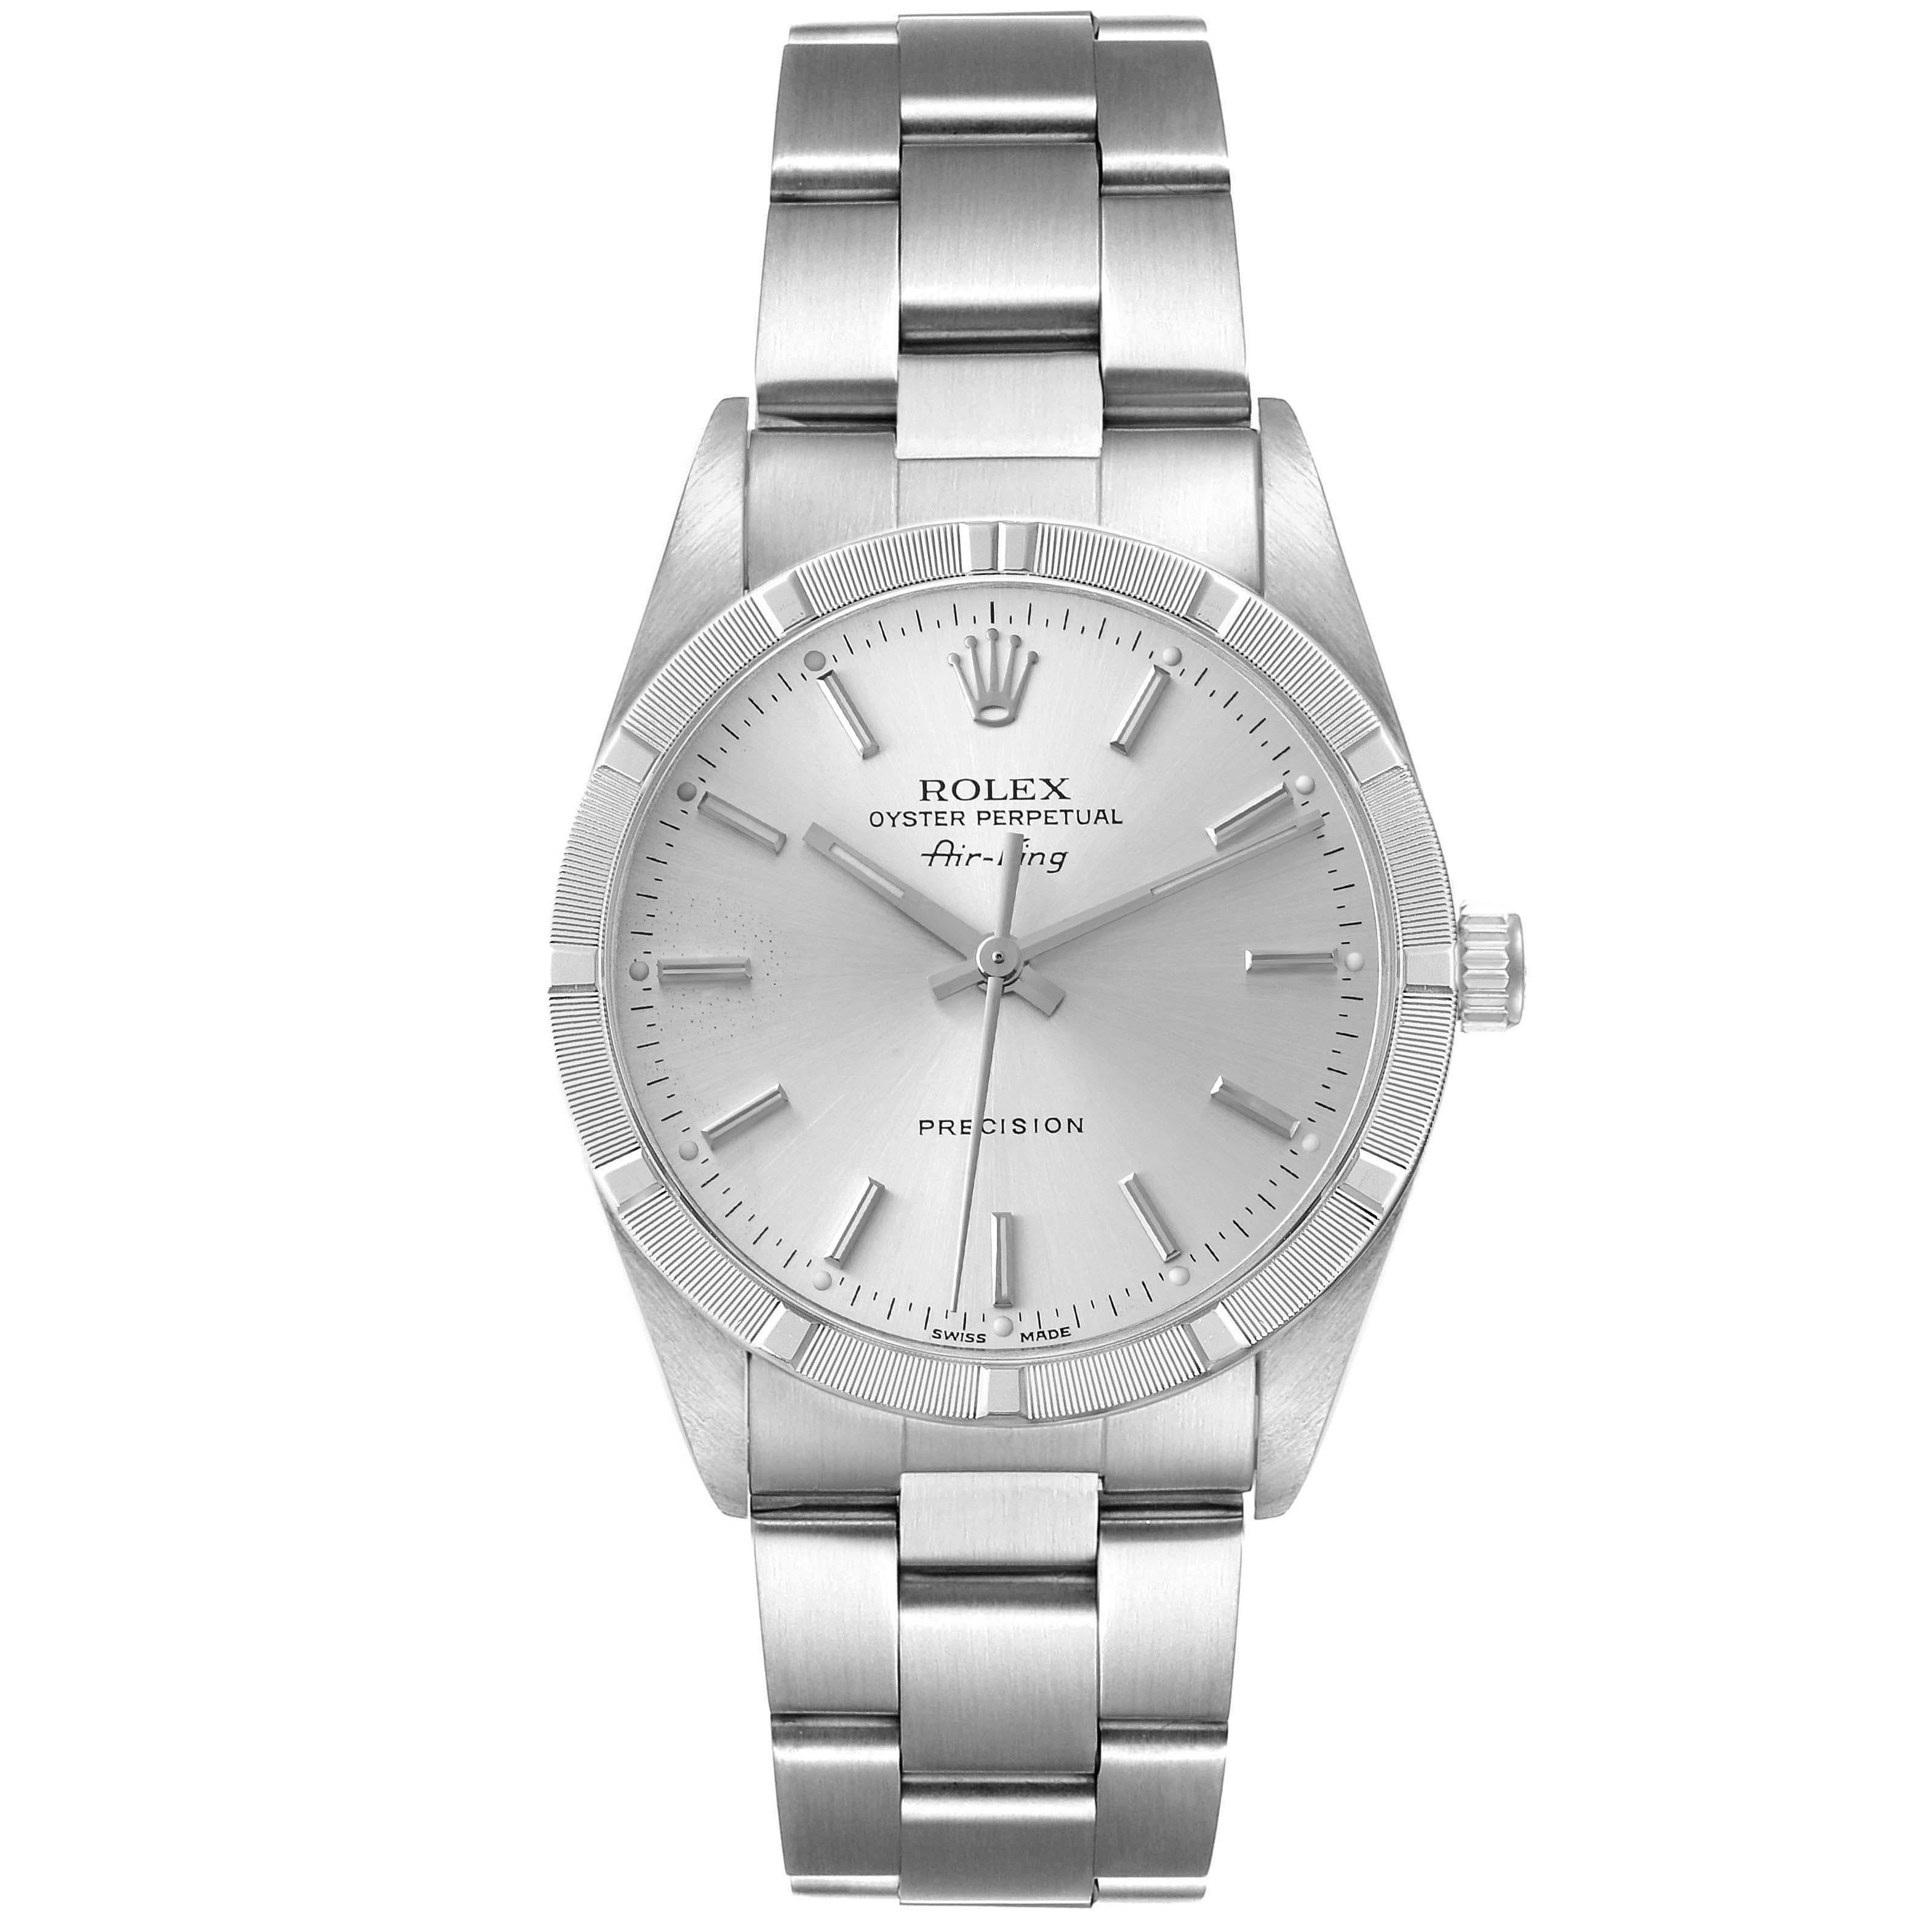 Rolex Air King Silver Dial 34mm Steel Mens Watch 14010. Automatic self-winding movement. Stainless steel case 34.0 mm in diameter. Rolex logo on crown. Stainless steel engine turned bezel. Scratch resistant sapphire crystal. Silver dial with raised